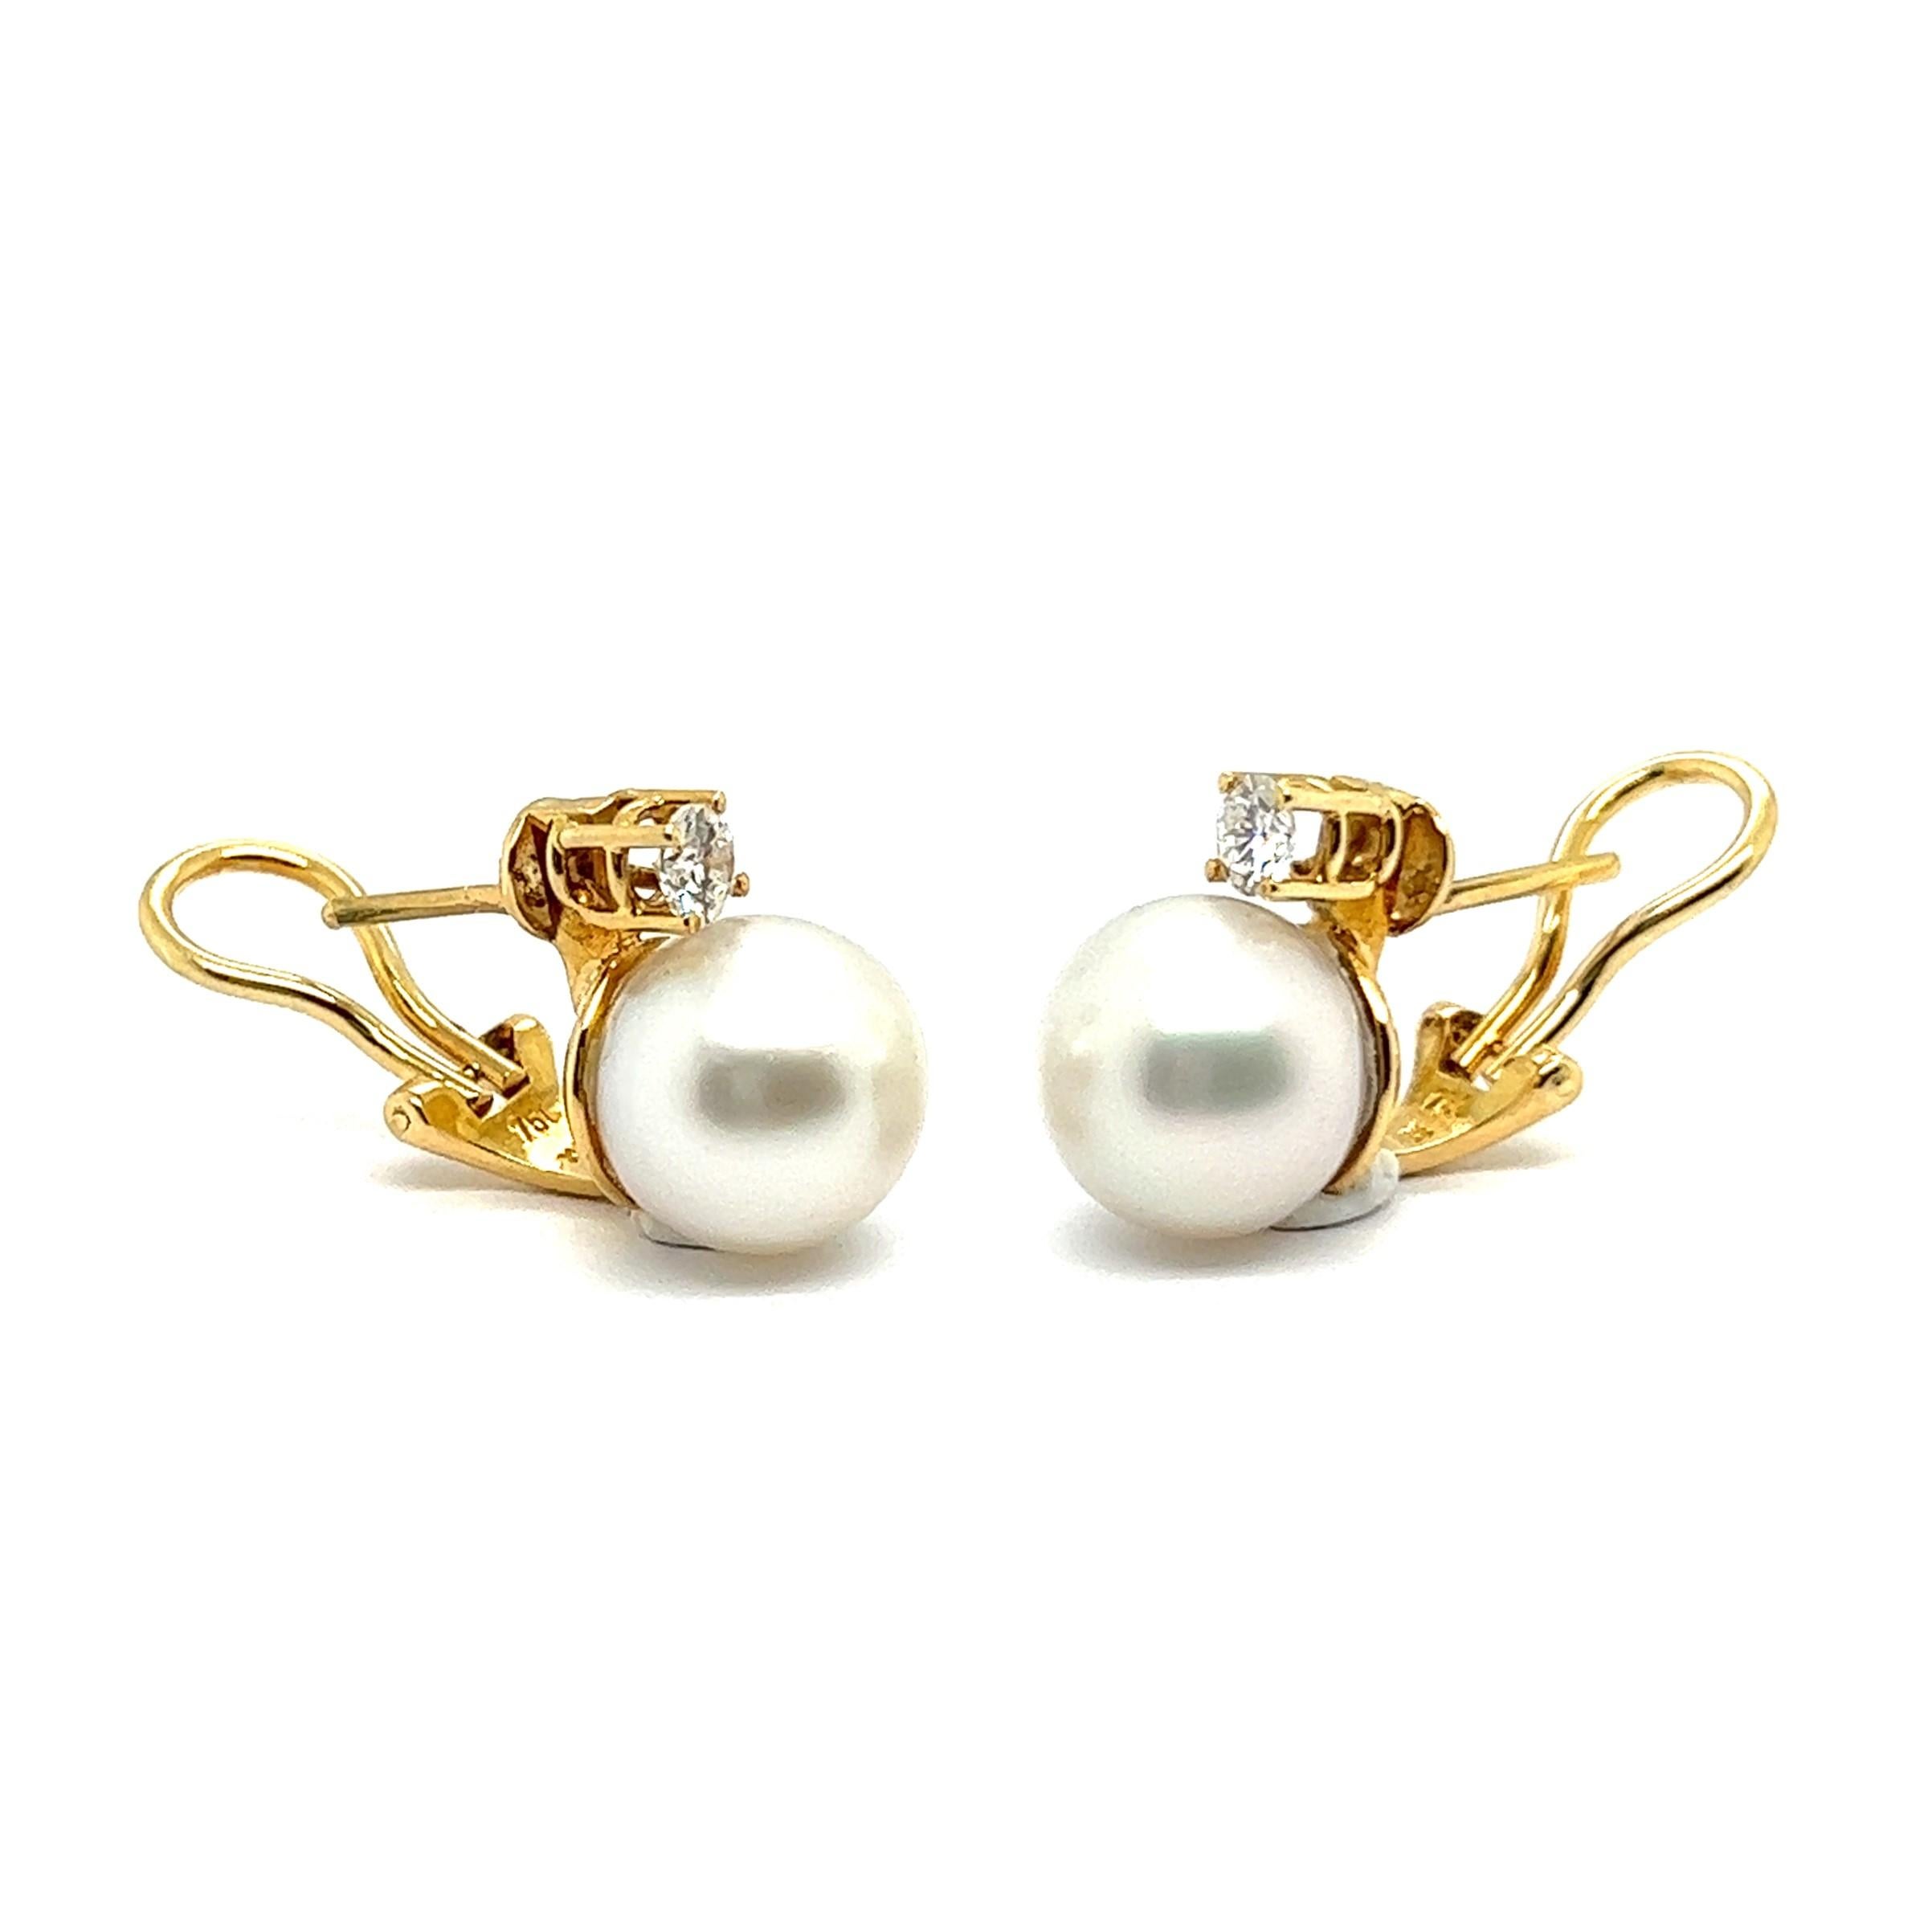 Ear clips with South Sea Pearls & Diamonds in 18 Karat Yellow Gold 5